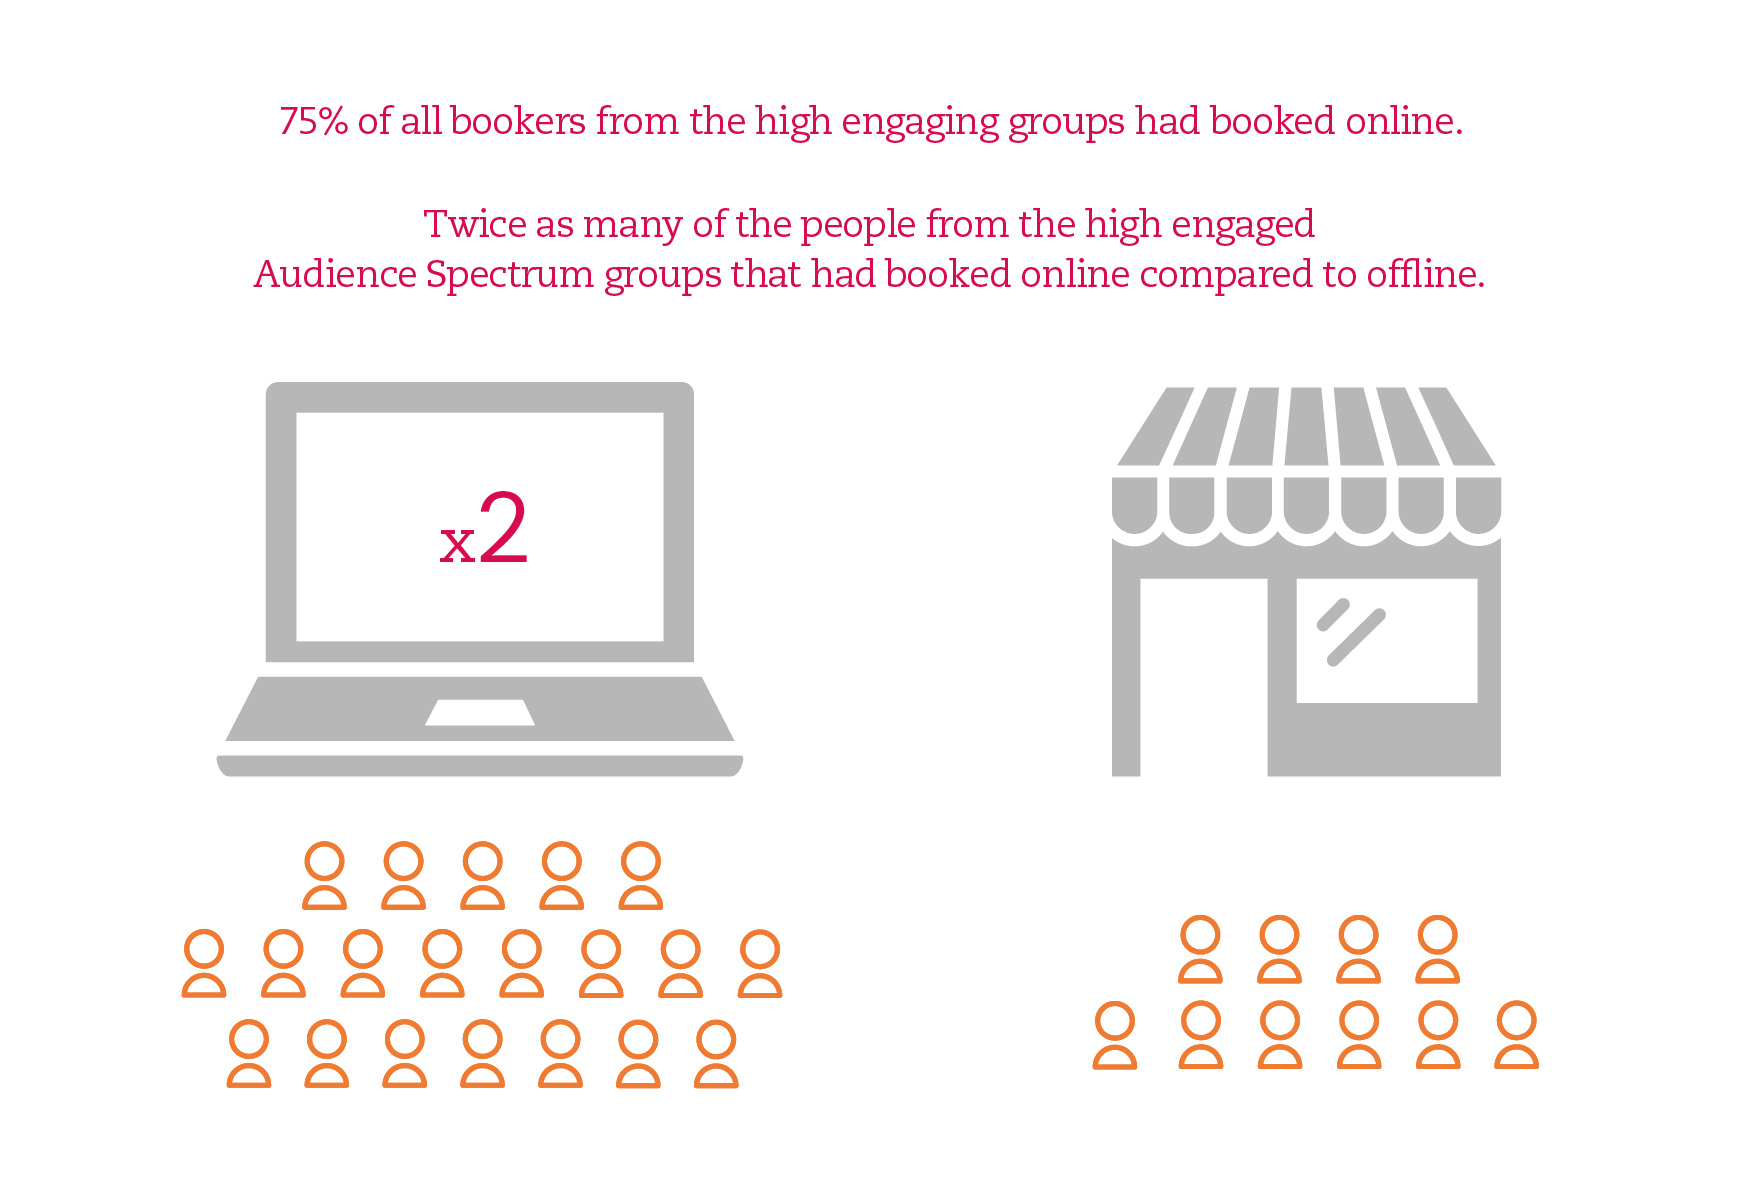 If we split the Audience Spectrum groups into high-, medium- and low-engaged groups, we see that people in each of these three engagement bands are more likely to book online than offline. But significantly more of the bookers in the higher engaged groups tend to book online.